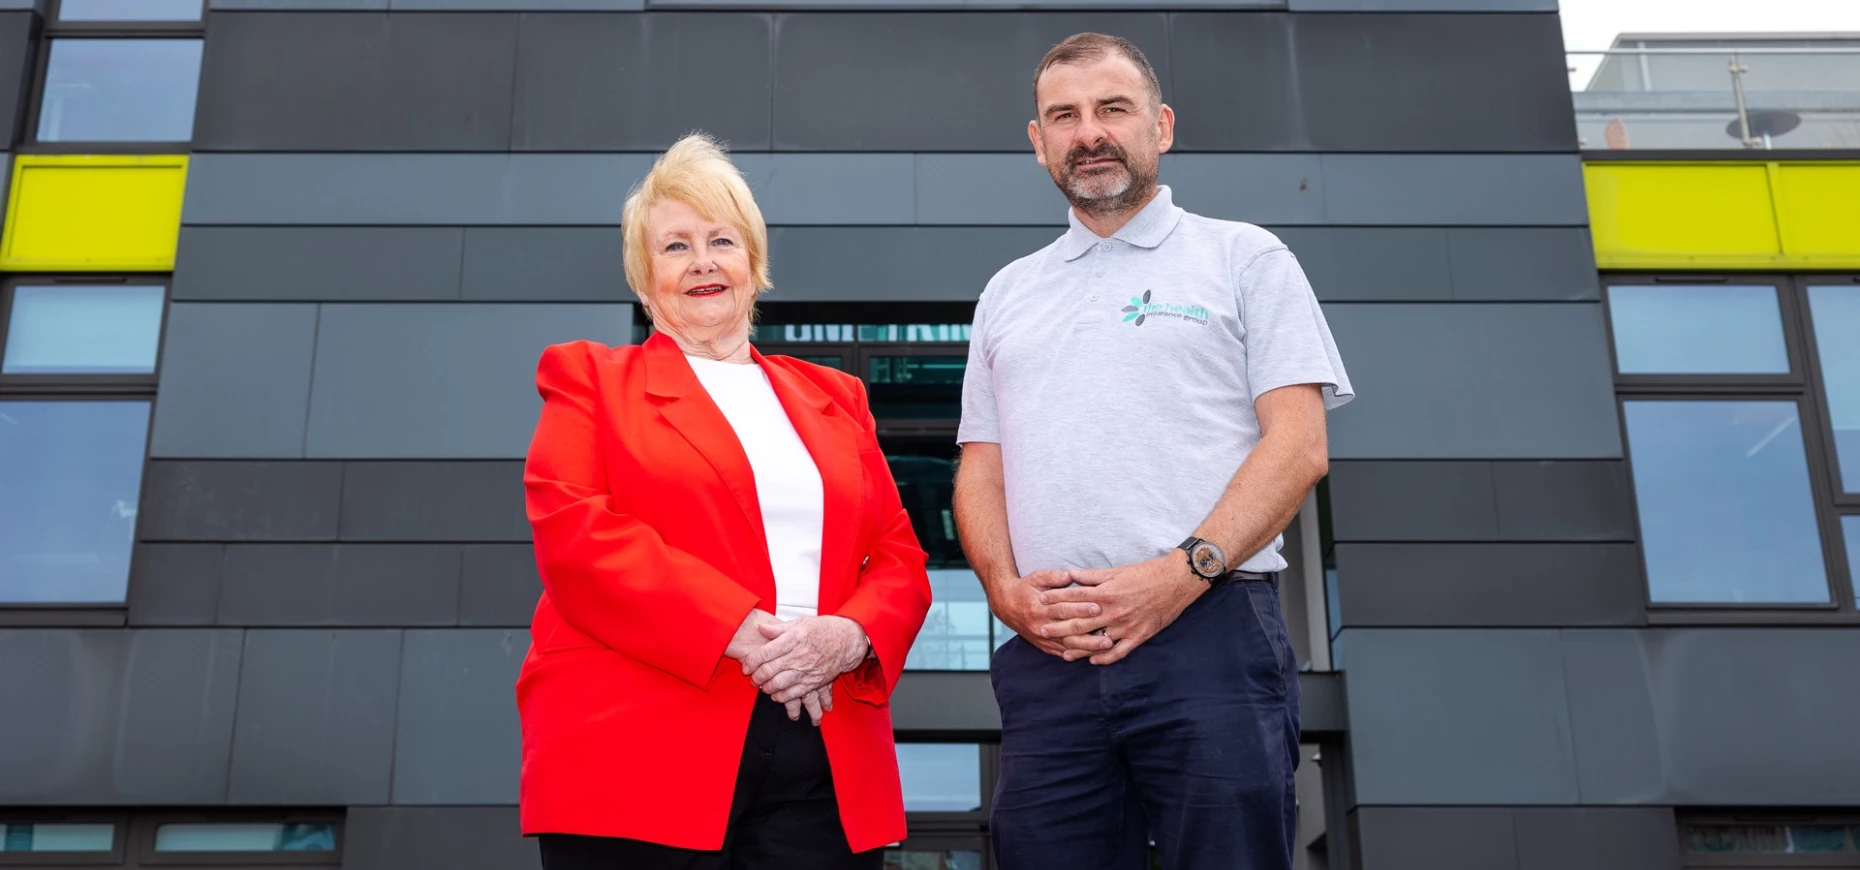 Councillor Margaret Meling, lead member for economic growth and transport at South Tyneside Council and Adam Brown, employee benefits specialist at The Health Insurance Group.